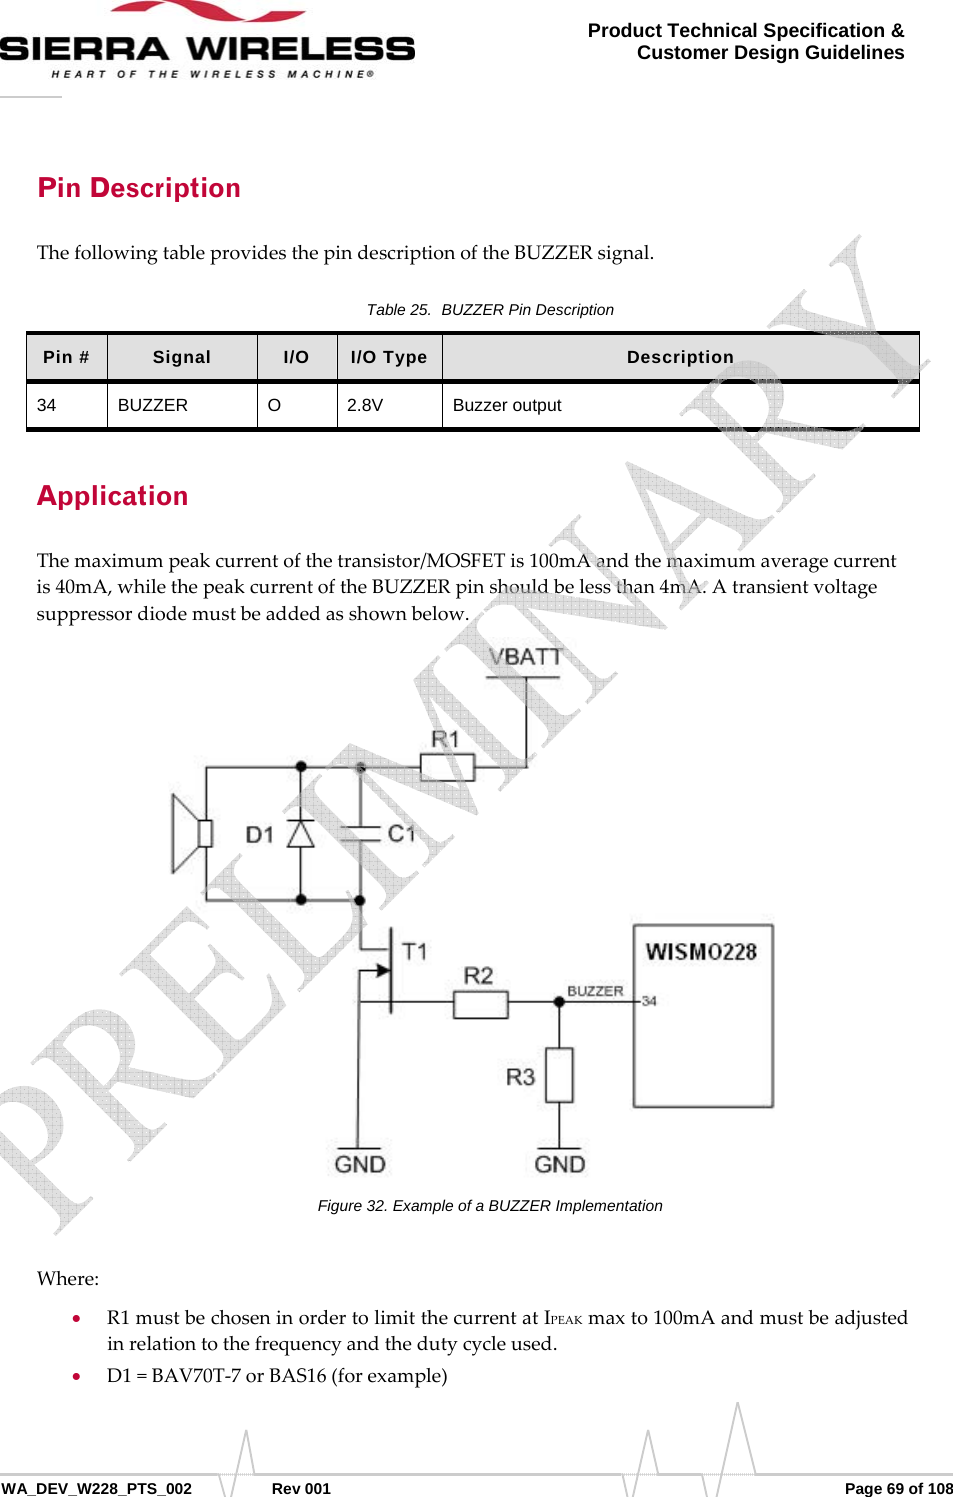      WA_DEV_W228_PTS_002 Rev 001  Page 69 of 108 Product Technical Specification &amp; Customer Design Guidelines Pin Description ThefollowingtableprovidesthepindescriptionoftheBUZZERsignal.Table 25.  BUZZER Pin Description Pin #  Signal  I/O  I/O Type  Description 34 BUZZER  O  2.8V  Buzzer output Application Themaximumpeakcurrentofthetransistor/MOSFETis100mAandthemaximumaveragecurrentis40mA,whilethepeakcurrentoftheBUZZERpinshouldbelessthan4mA.Atransientvoltagesuppressordiodemustbeaddedasshownbelow.Figure 32. Example of a BUZZER Implementation Where:• R1mustbechoseninordertolimitthecurrentatIPEAKmaxto100mAandmustbeadjustedinrelationtothefrequencyandthedutycycleused.• D1=BAV70T‐7orBAS16(forexample)   